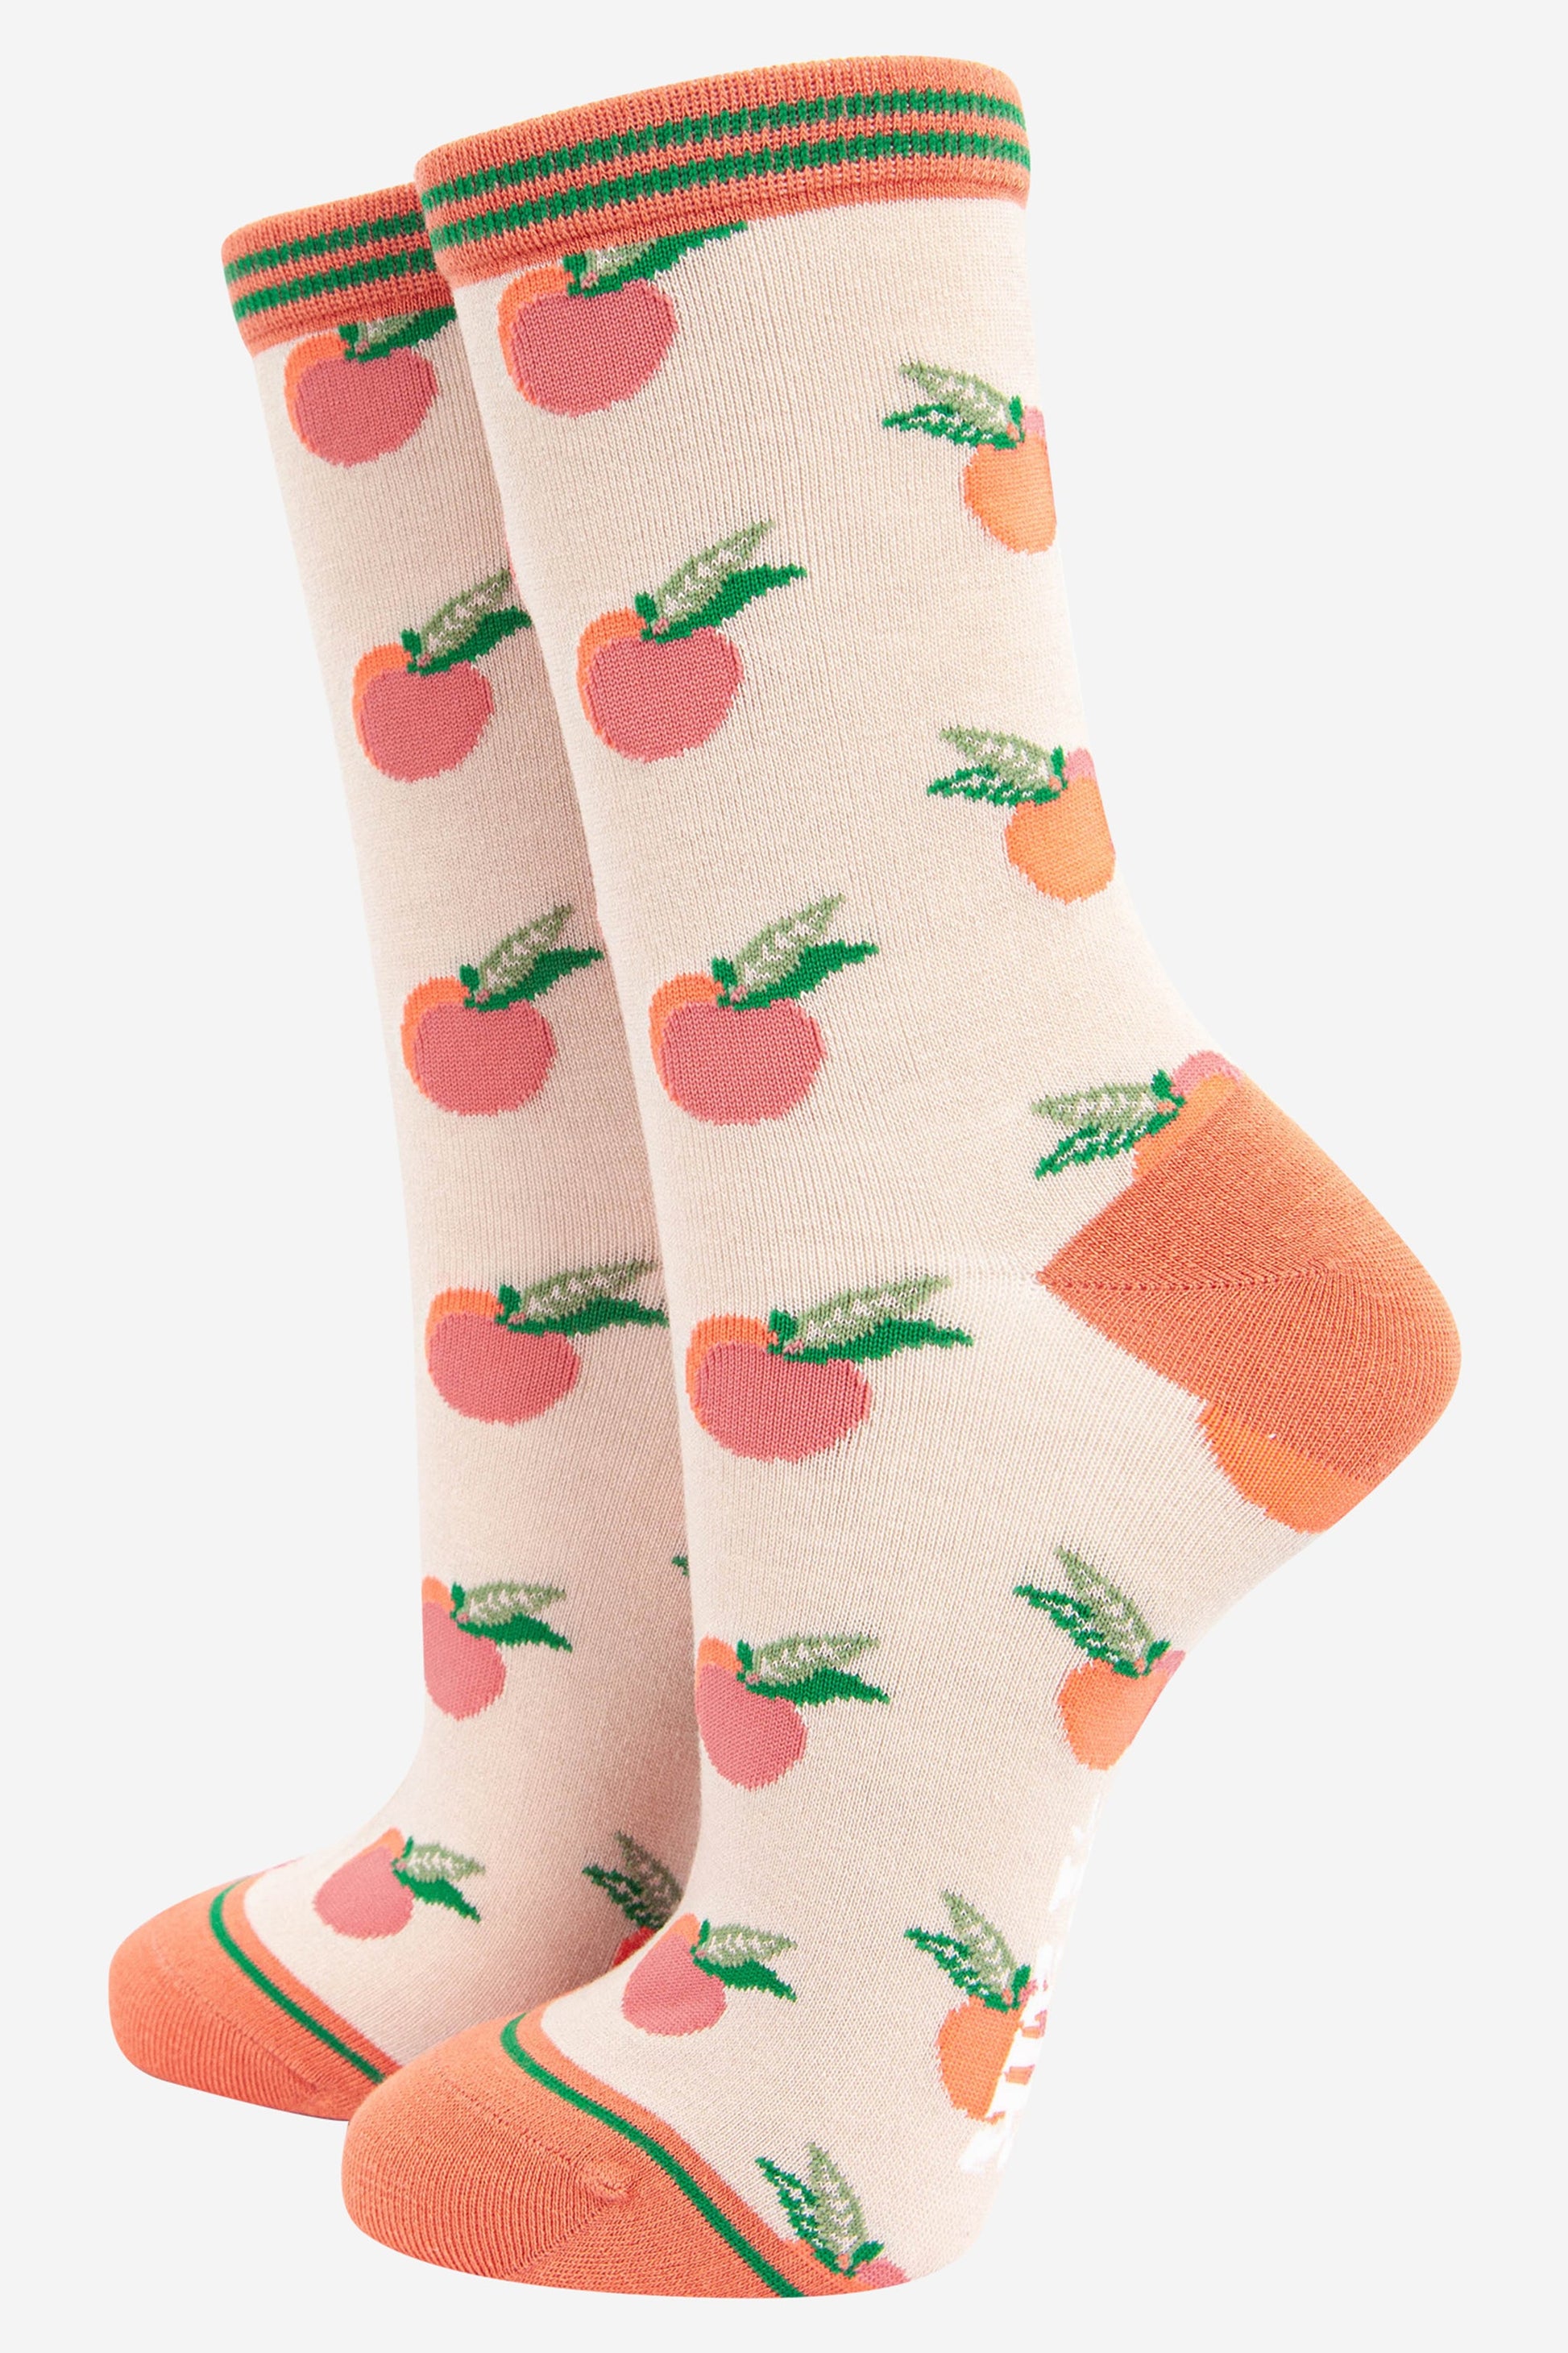 cream bamboo socks with an all over peach fruit pattern with a striped cuff